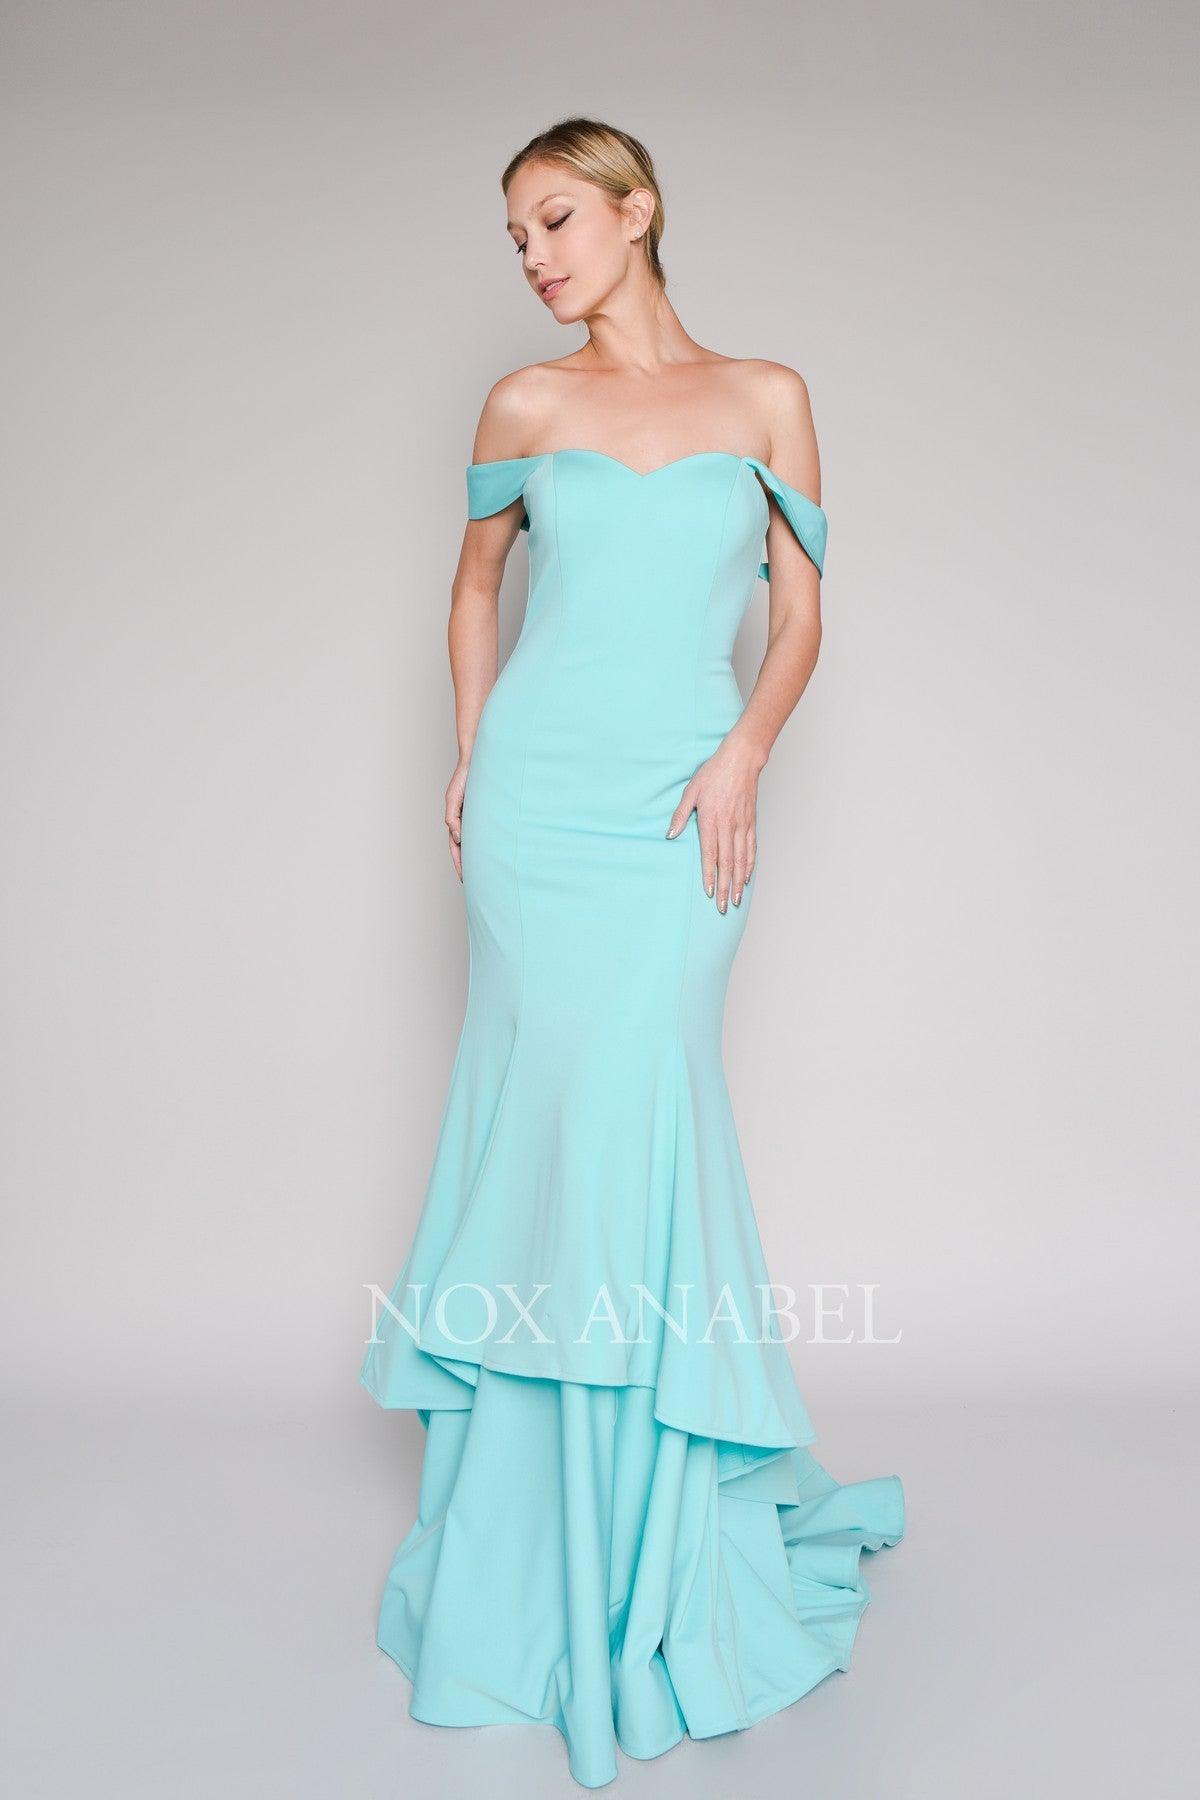 Long Prom Dress Formal Evening Tiered Mermaid Gown - The Dress Outlet